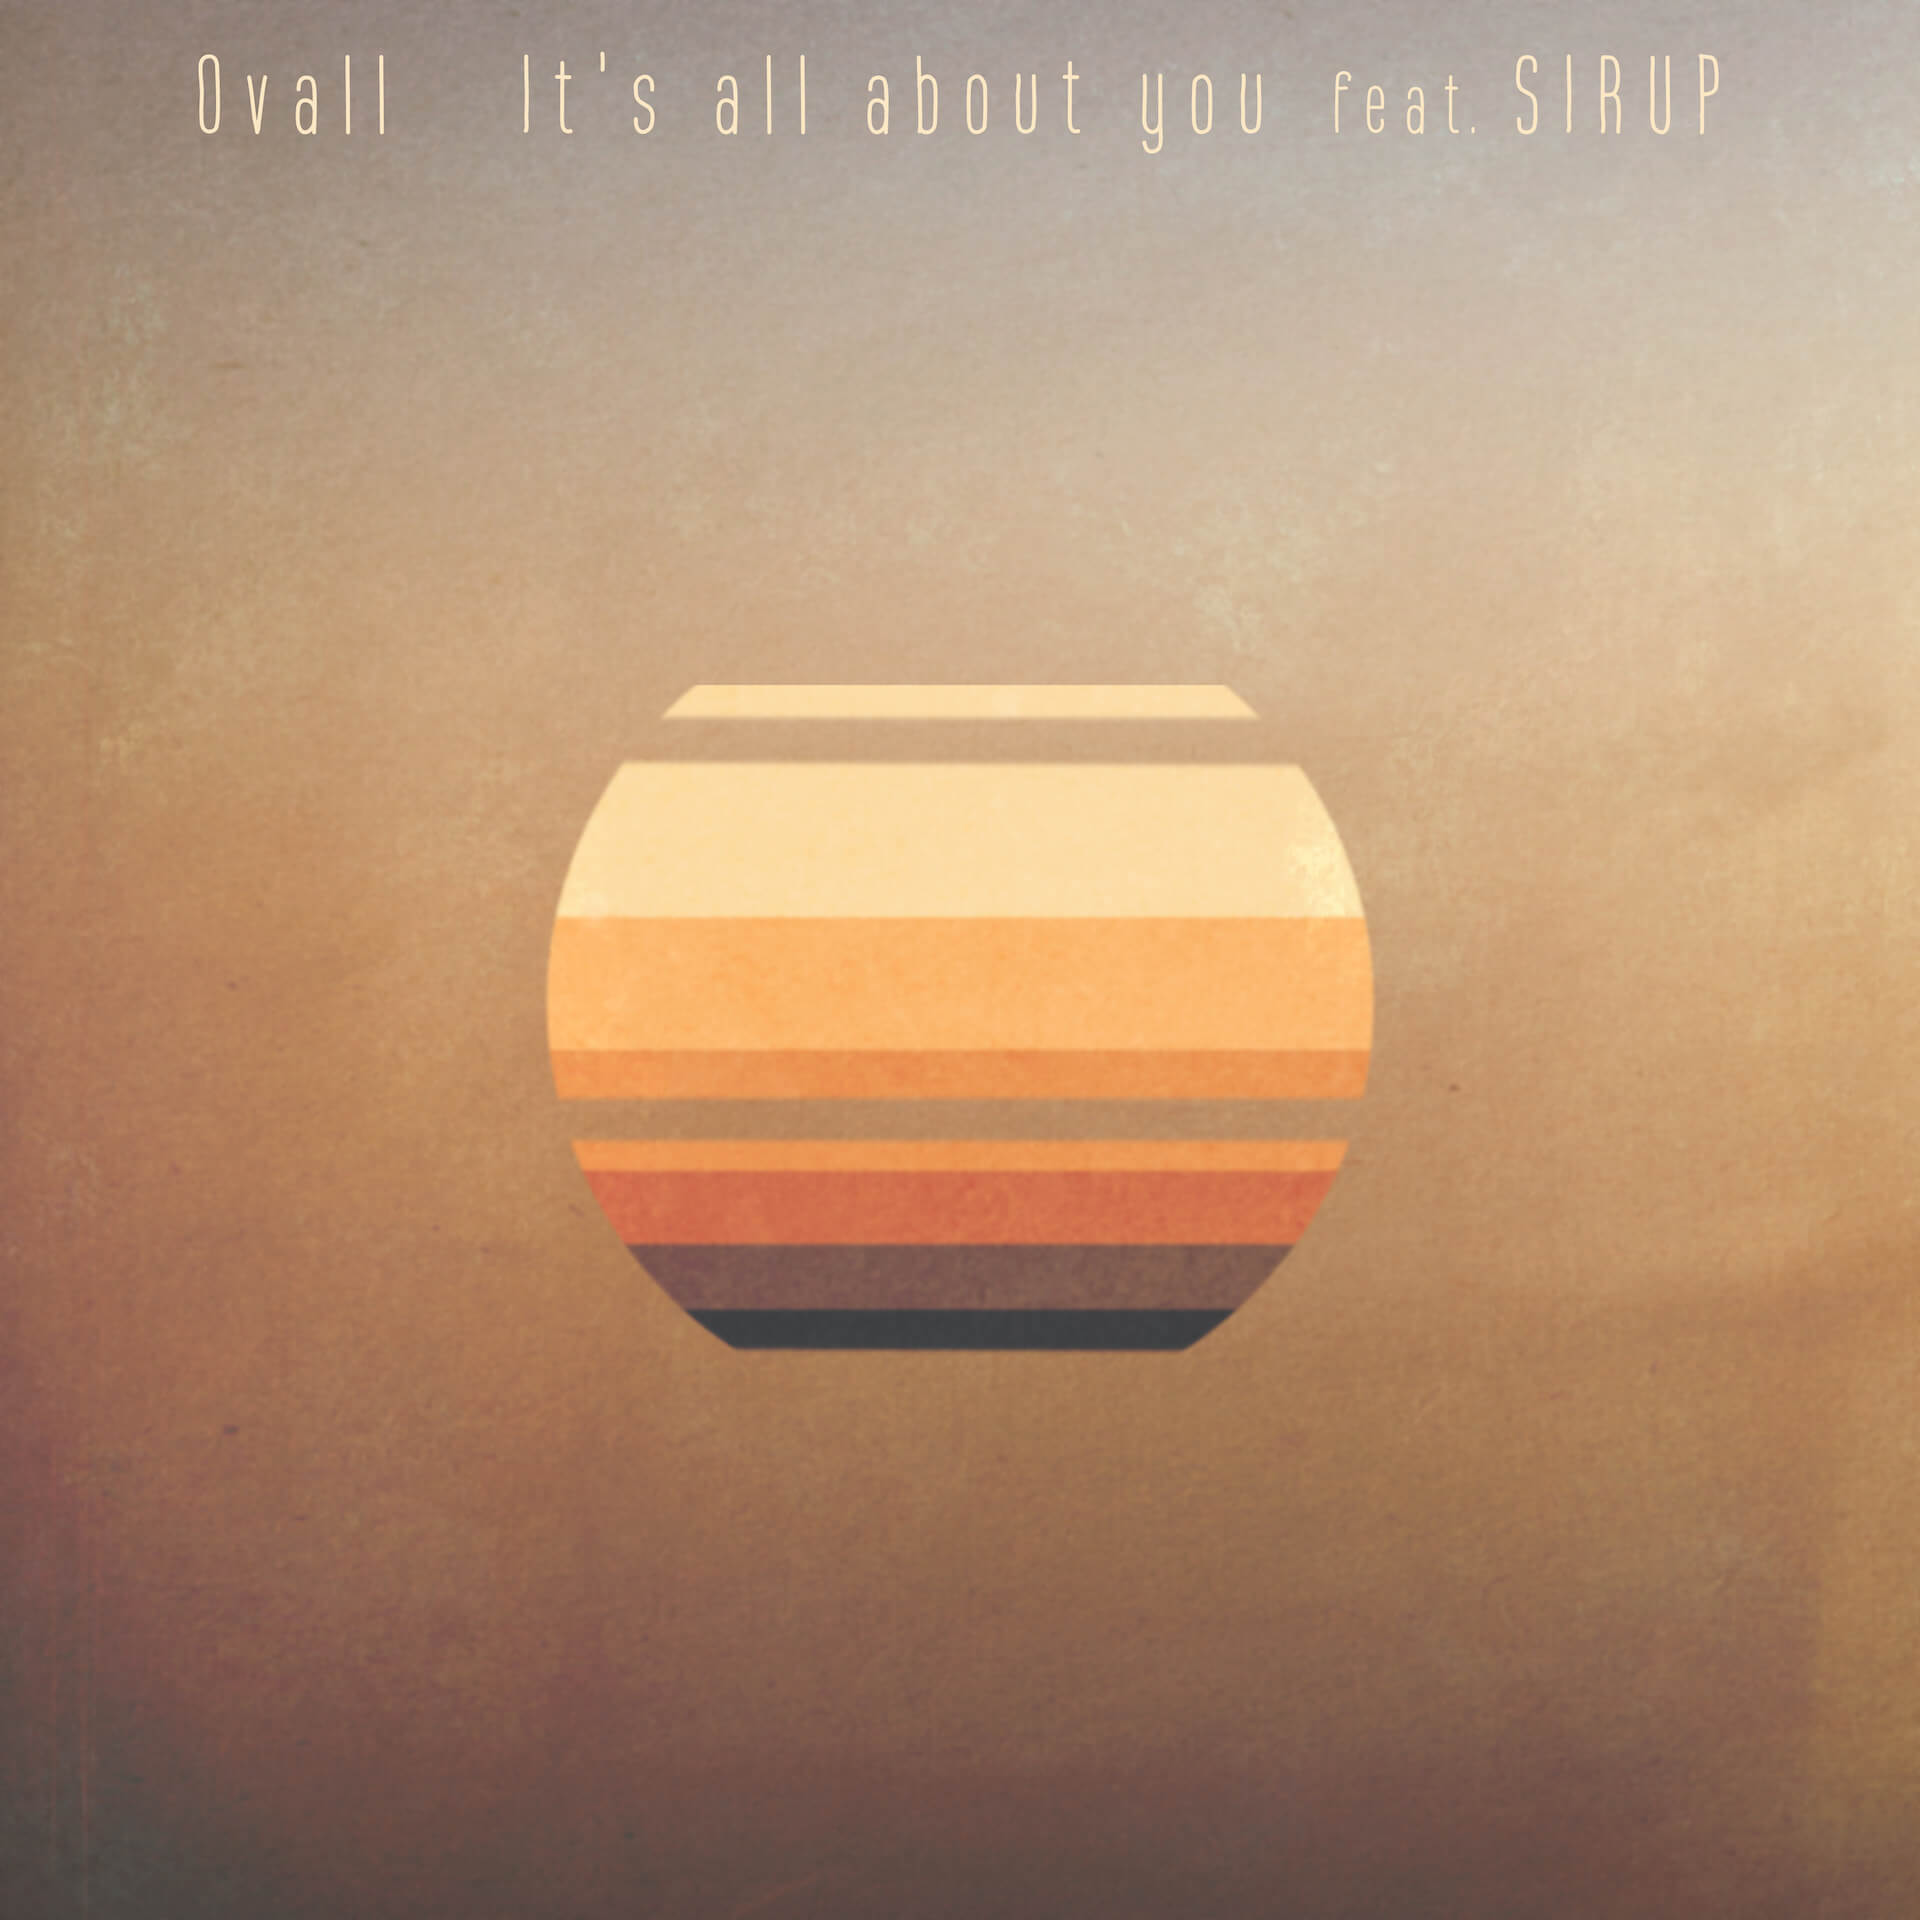 Ovall、SIRUPを客演に迎えたニューシングル“It's all about you”をリリース！ music_220118_ovall_03